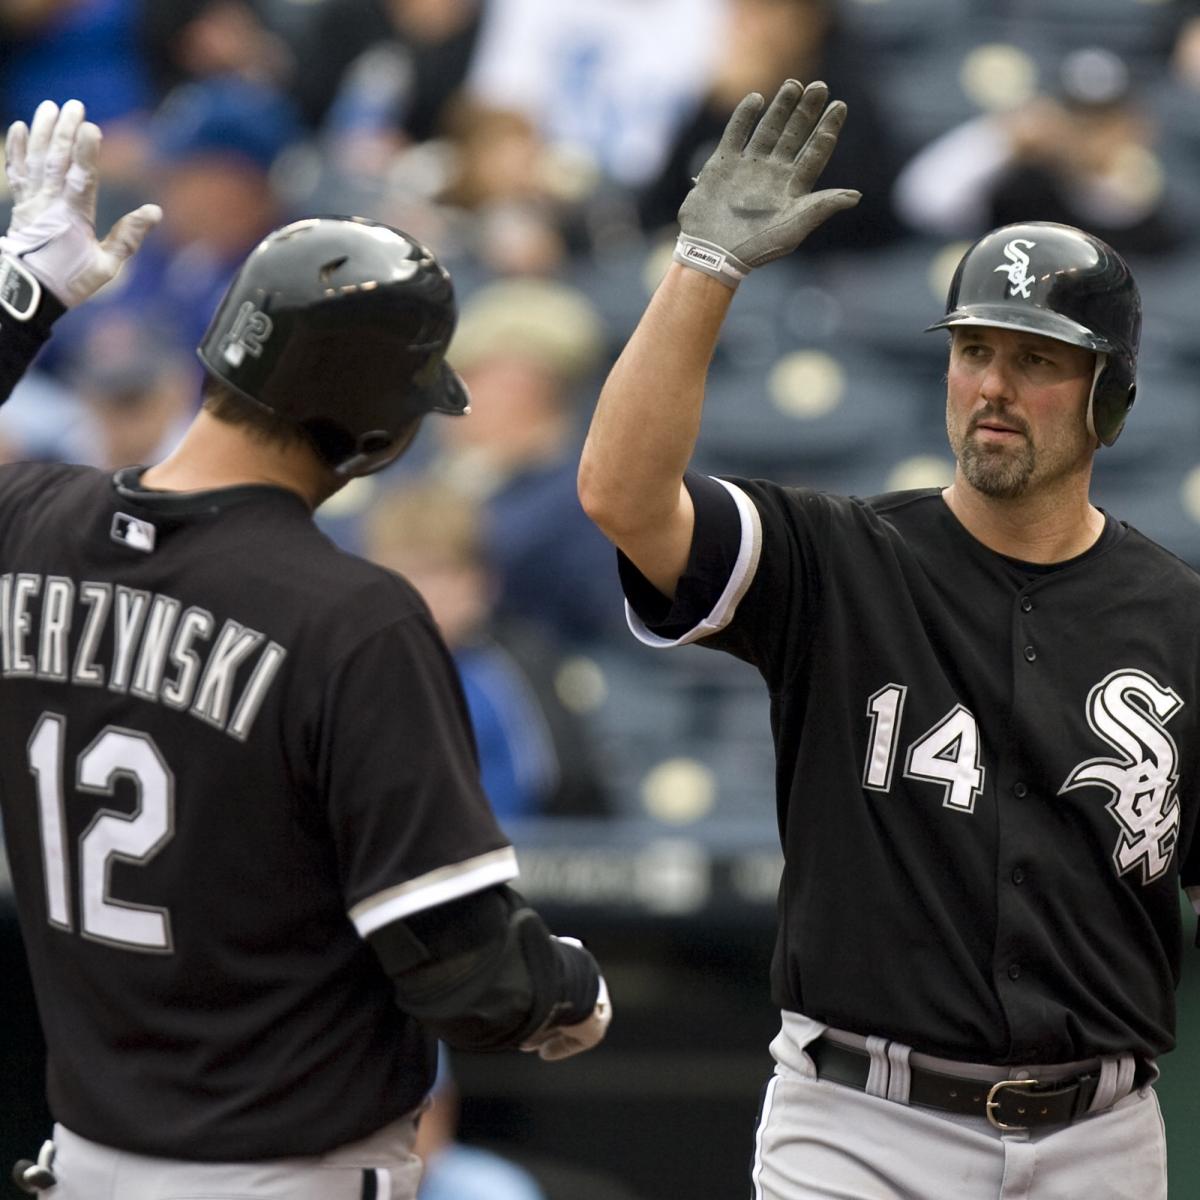 Paul Konerko's Chicago White Sox career was wildly underrated